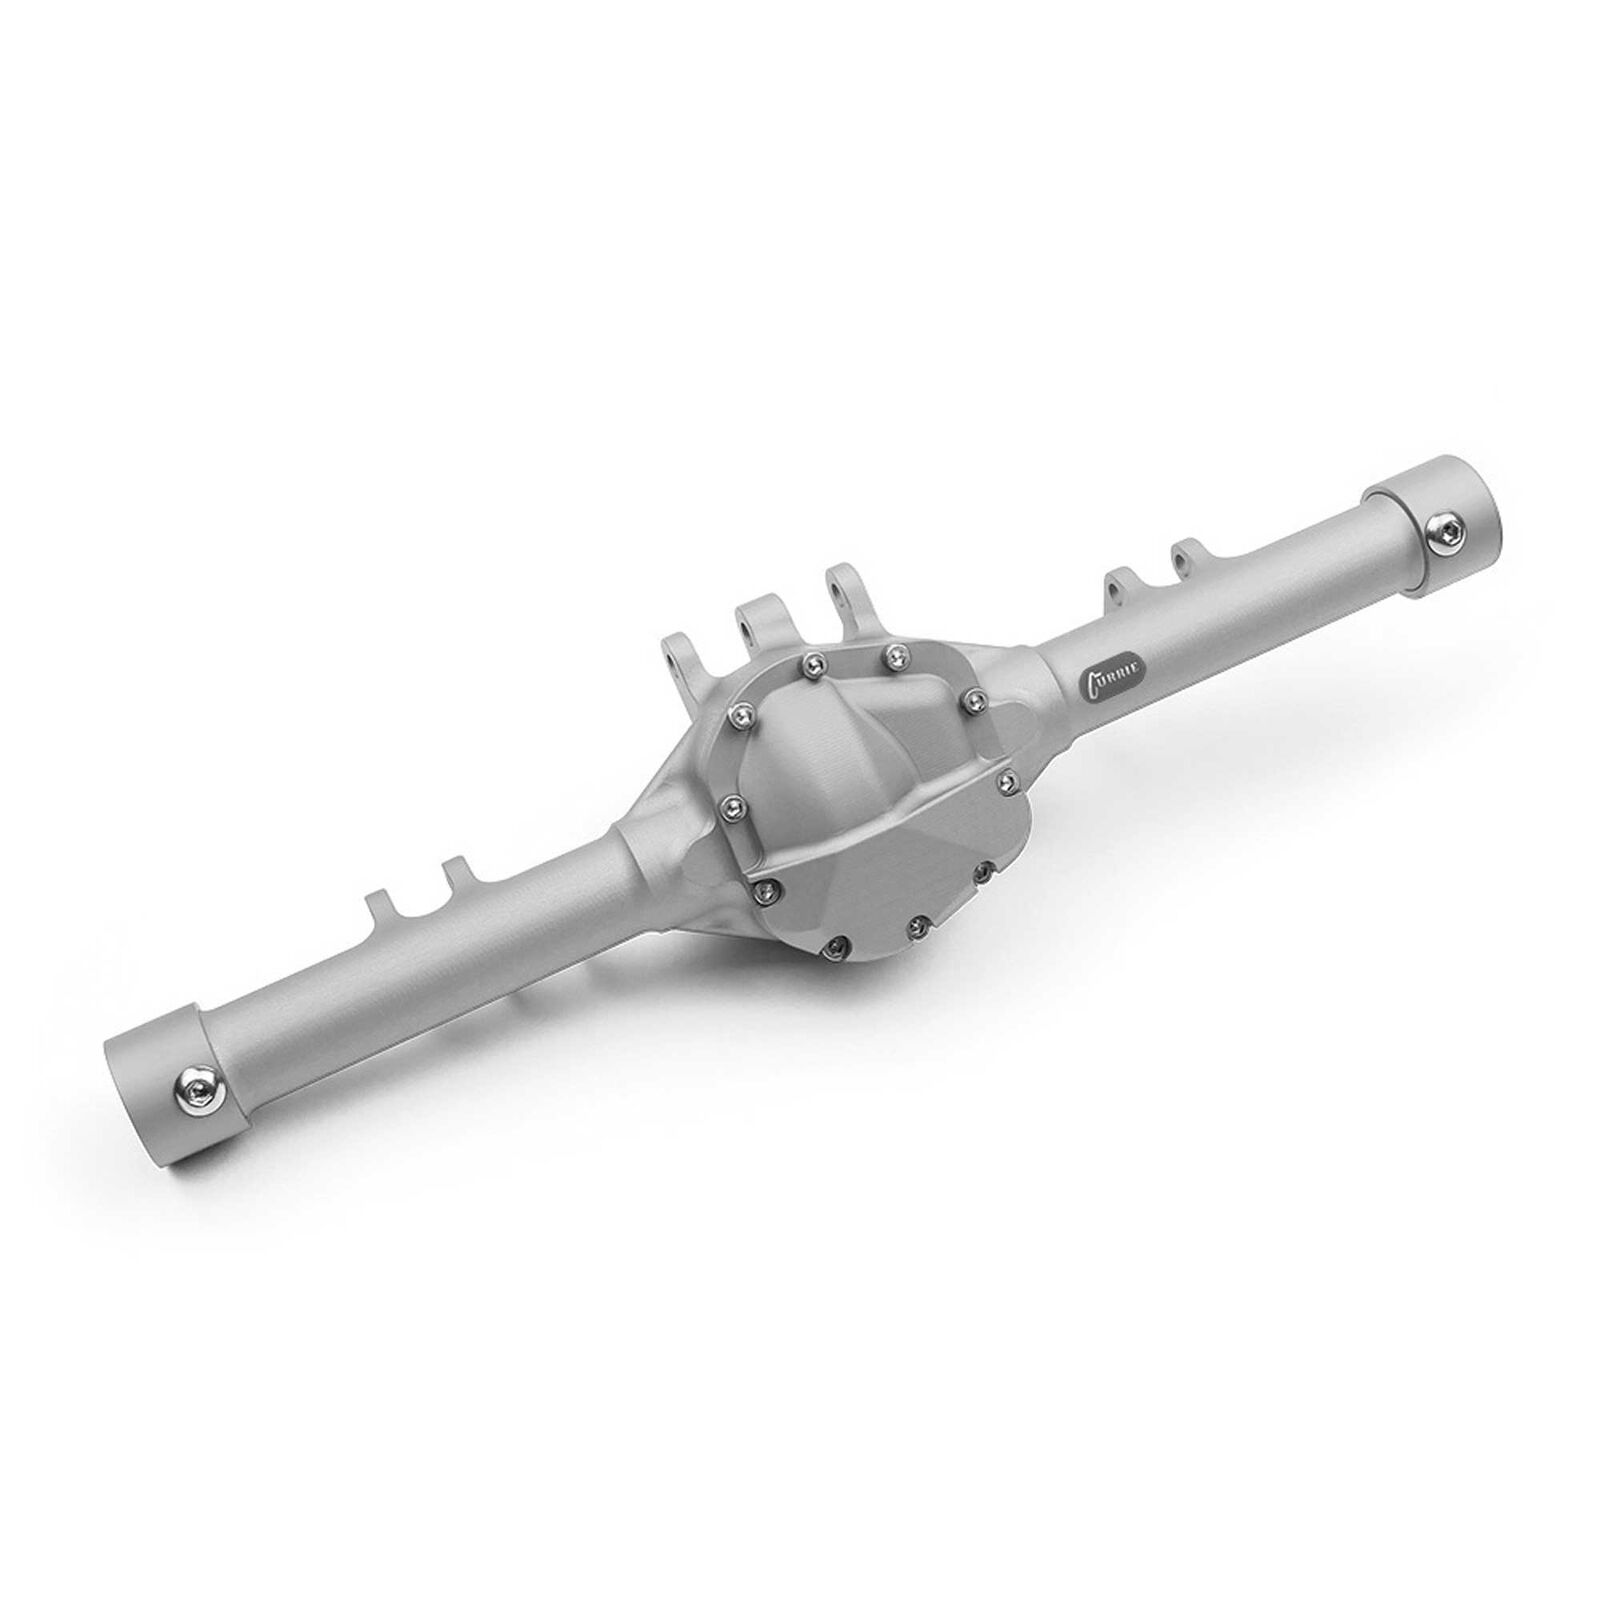 Currie VS4-10 D44 Rear Axle, Clear Anodized